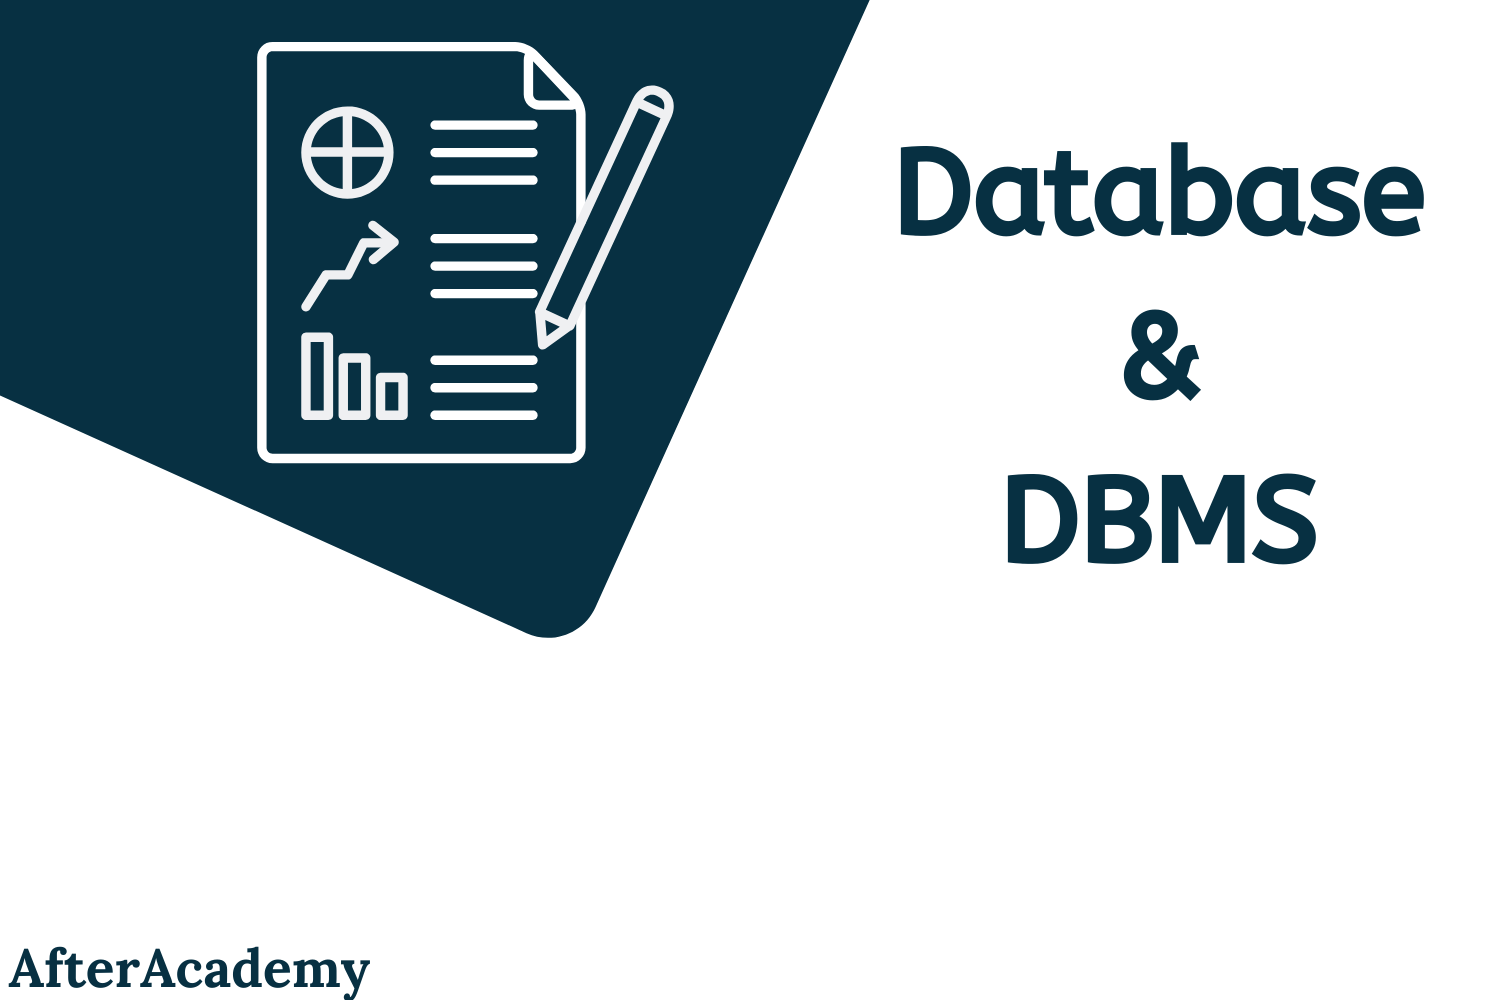 What is a Database and DBMS?